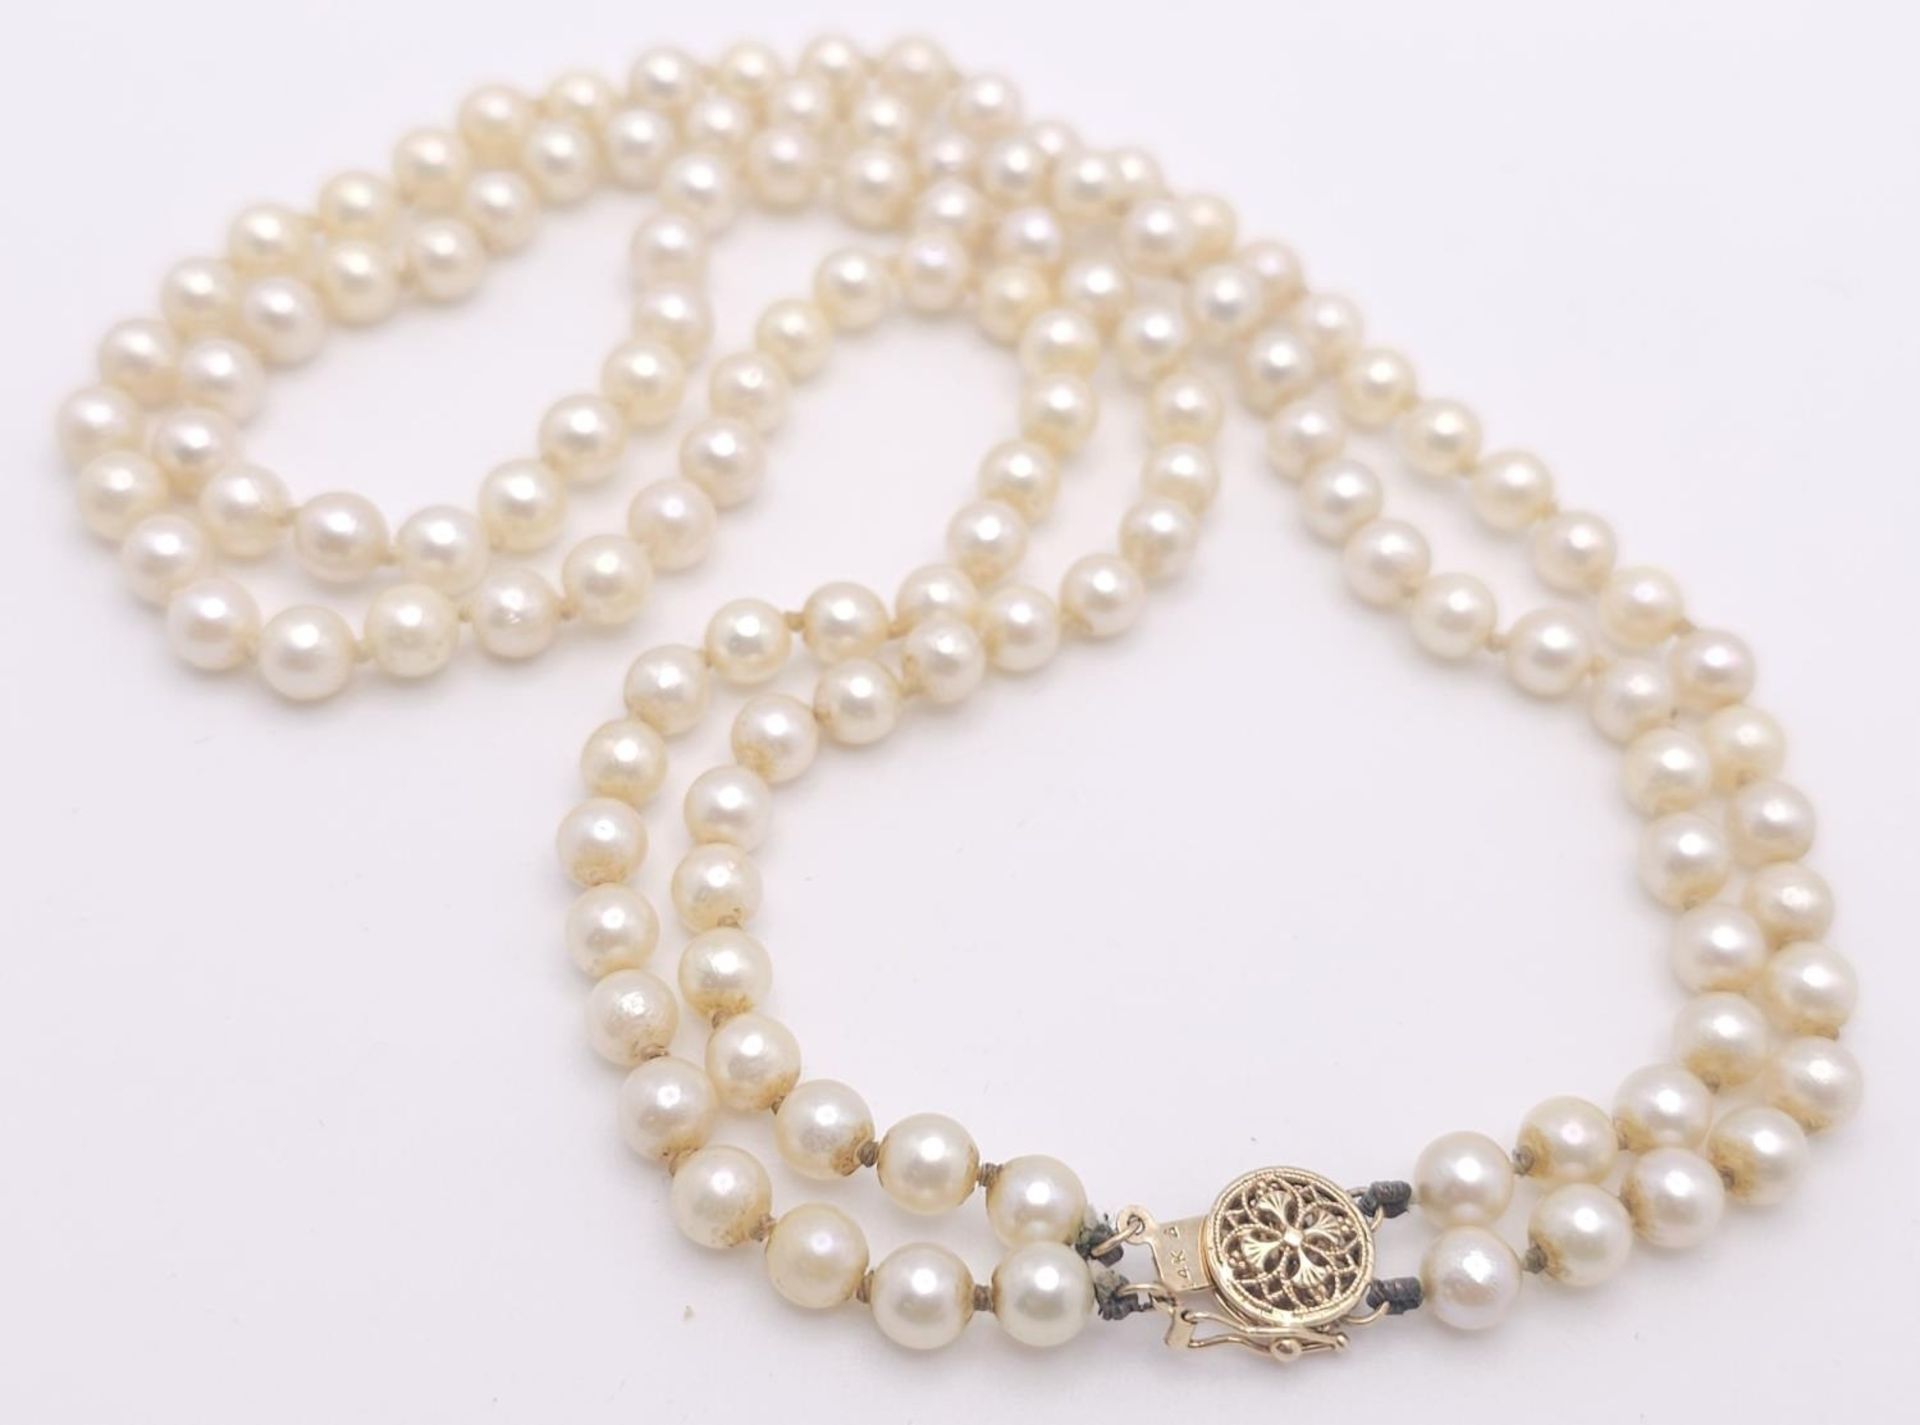 A Vintage Two Row Pearl Choker Necklace with a 14K Gold Clasp. 38cm.